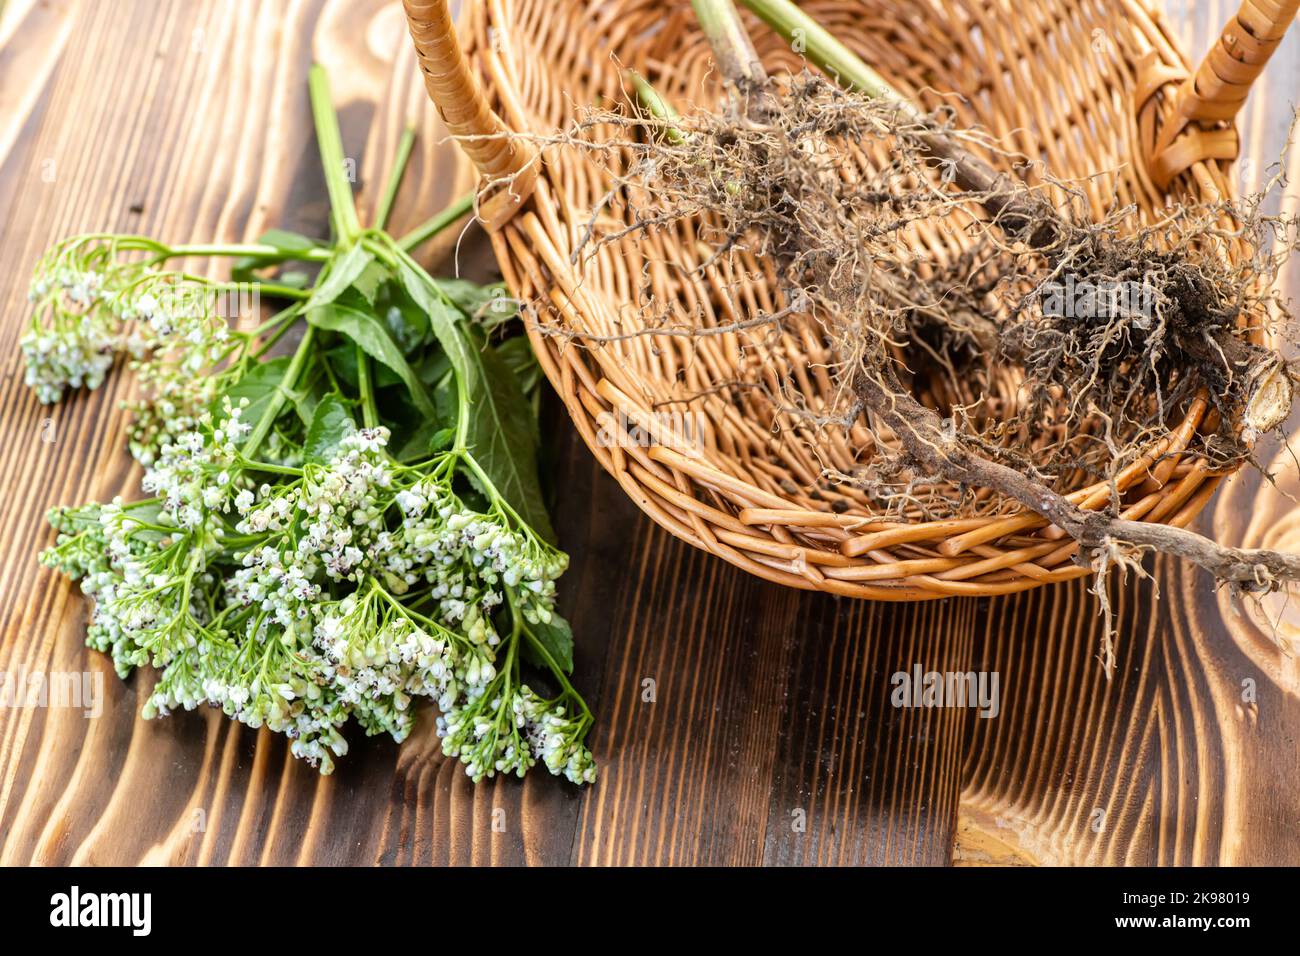 Fresh Valeriana officinalis flowers in wooden mortar. Valerian tablets among white flowers are on table. Used as an alternative to valium in natural m Stock Photo